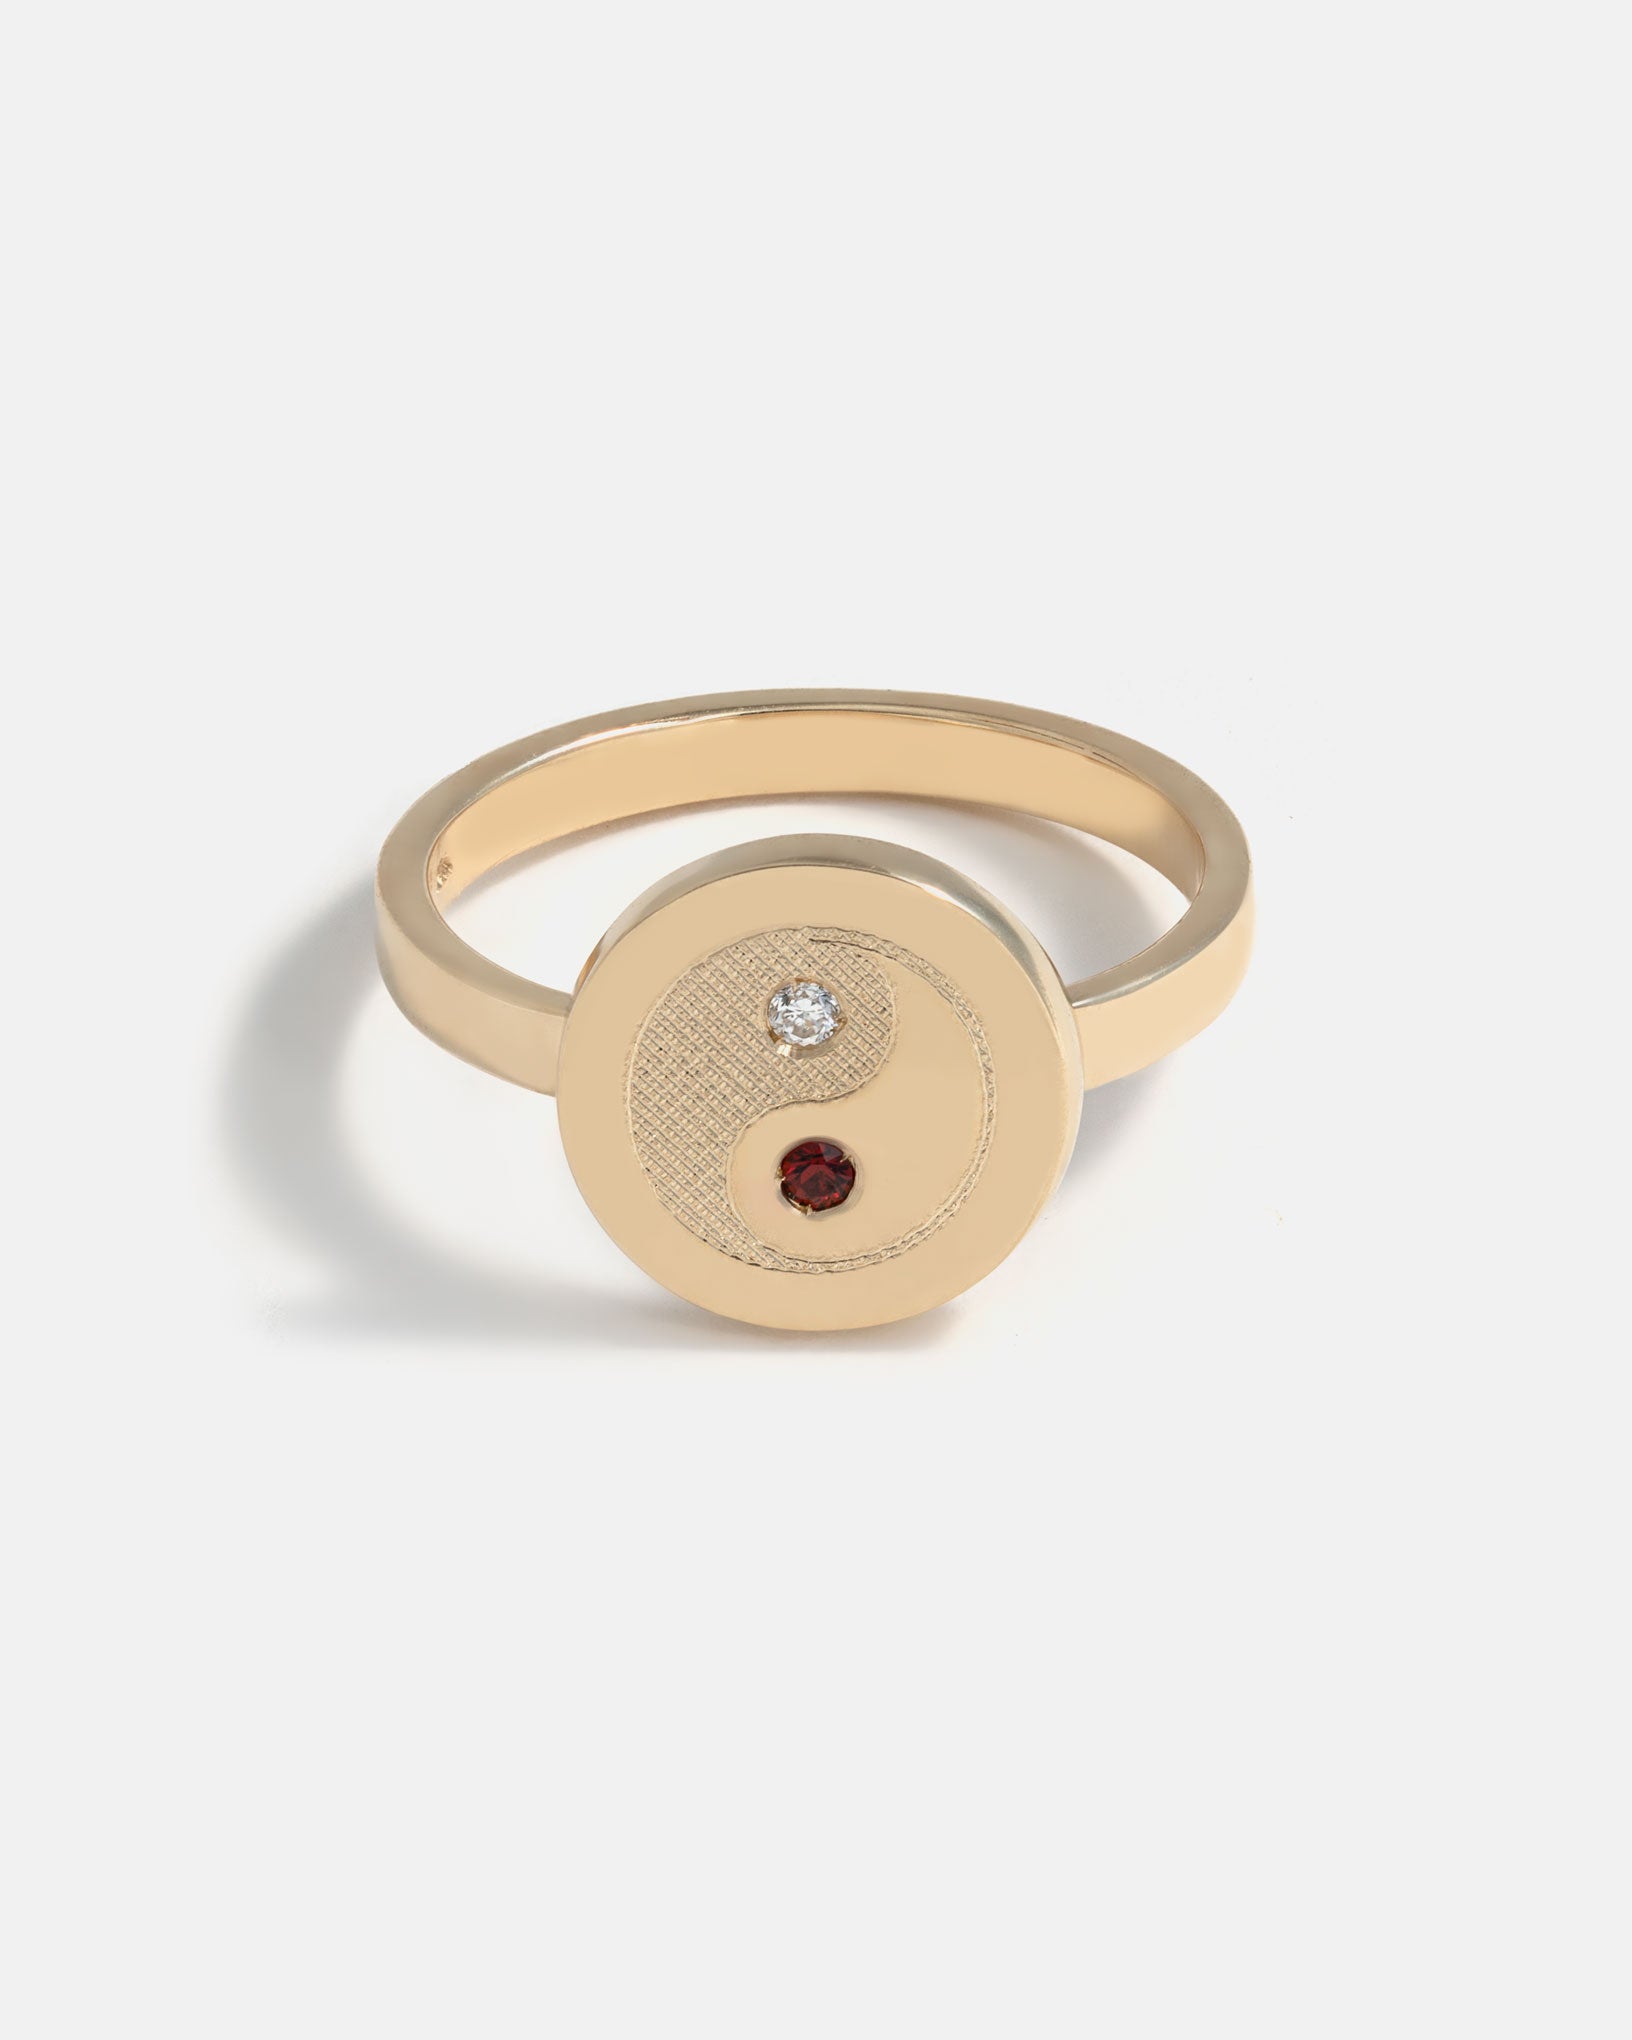 Yin & Yang Ring in Yellow Gold with lab grown Diamond and Anthill Garnet